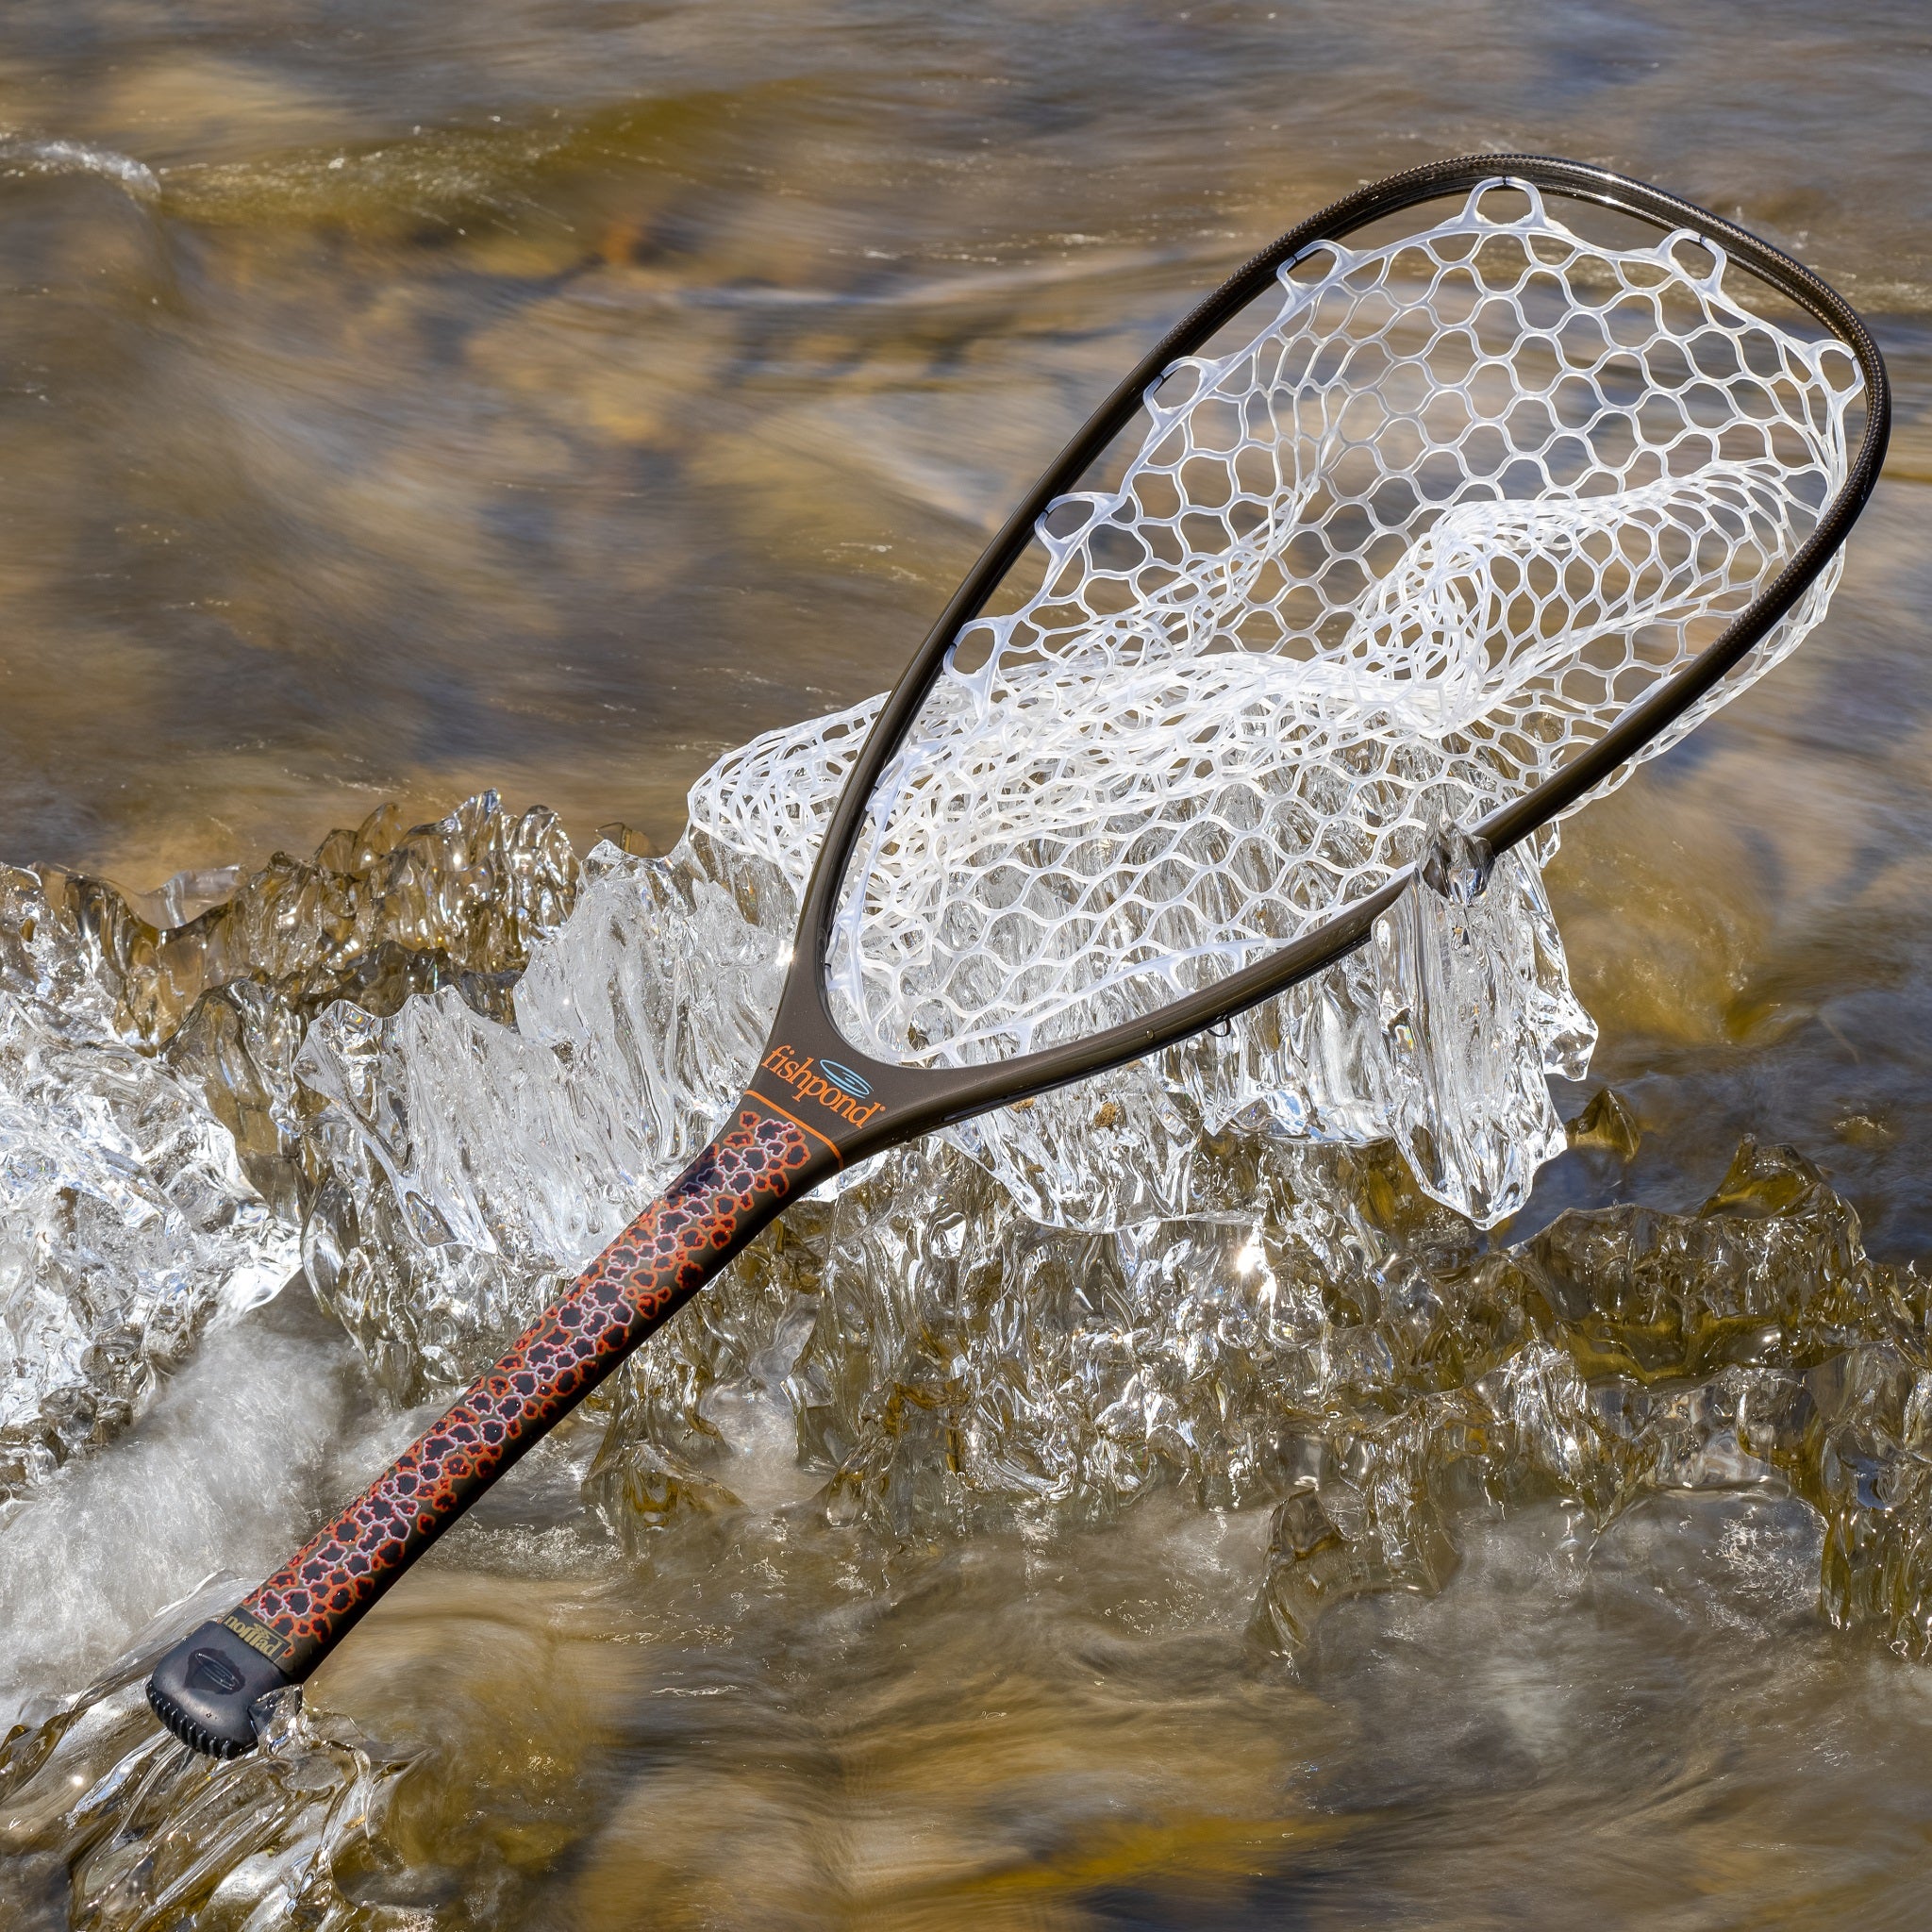 Accessories - Nets - Rising Nets - Platte River Fly Shop